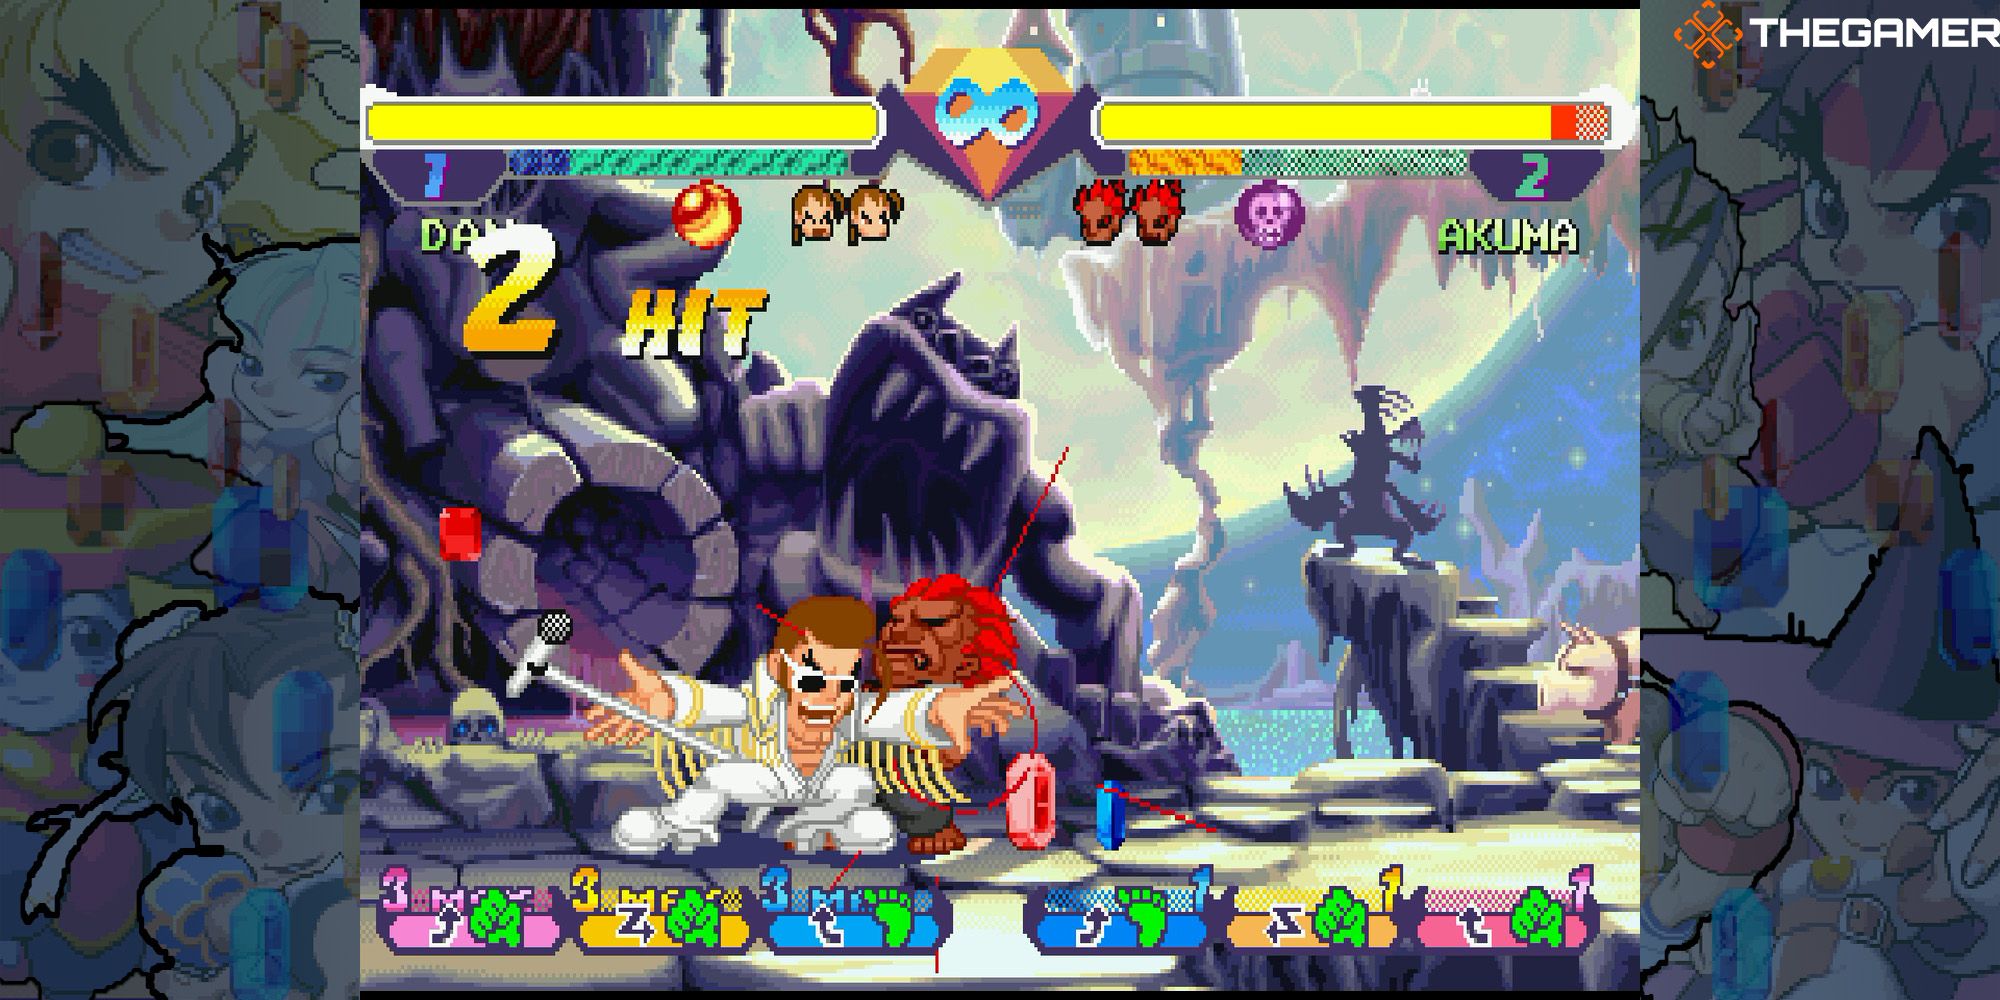 Dan struts around with a microphone as Elvis in a battle against Akuma at Moonlight Dark Castle. Pocket Fighter.